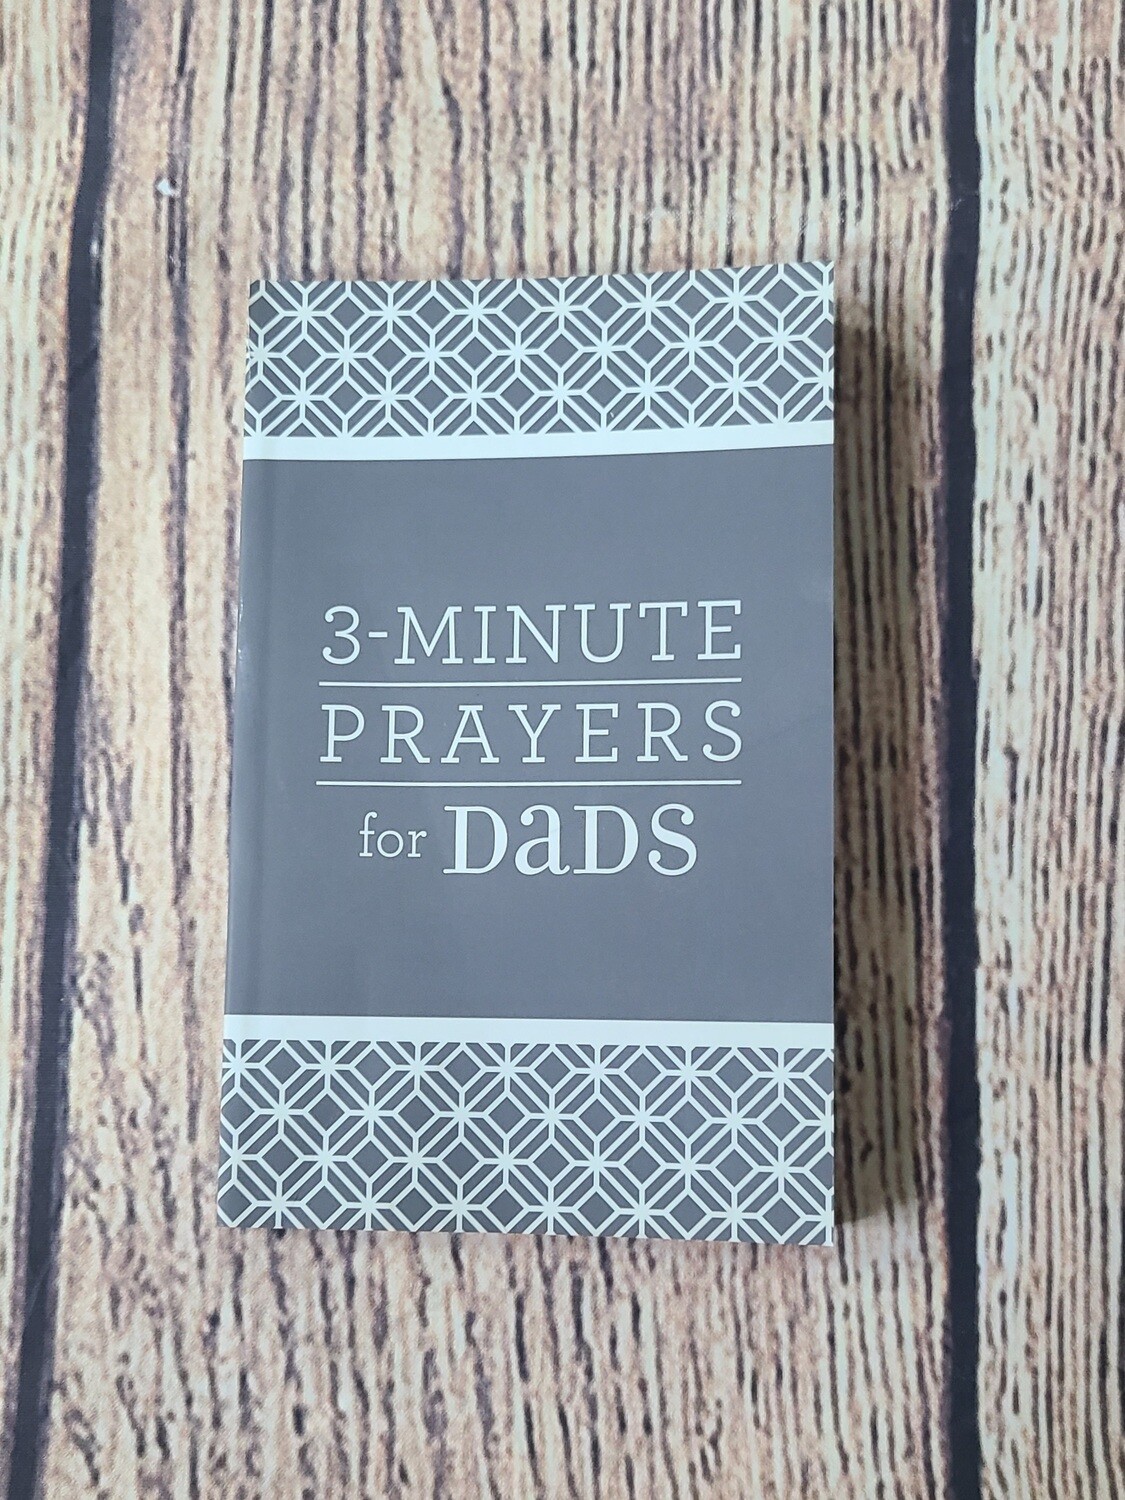 3-Minute Prayers for Dads by Barbour Publishing